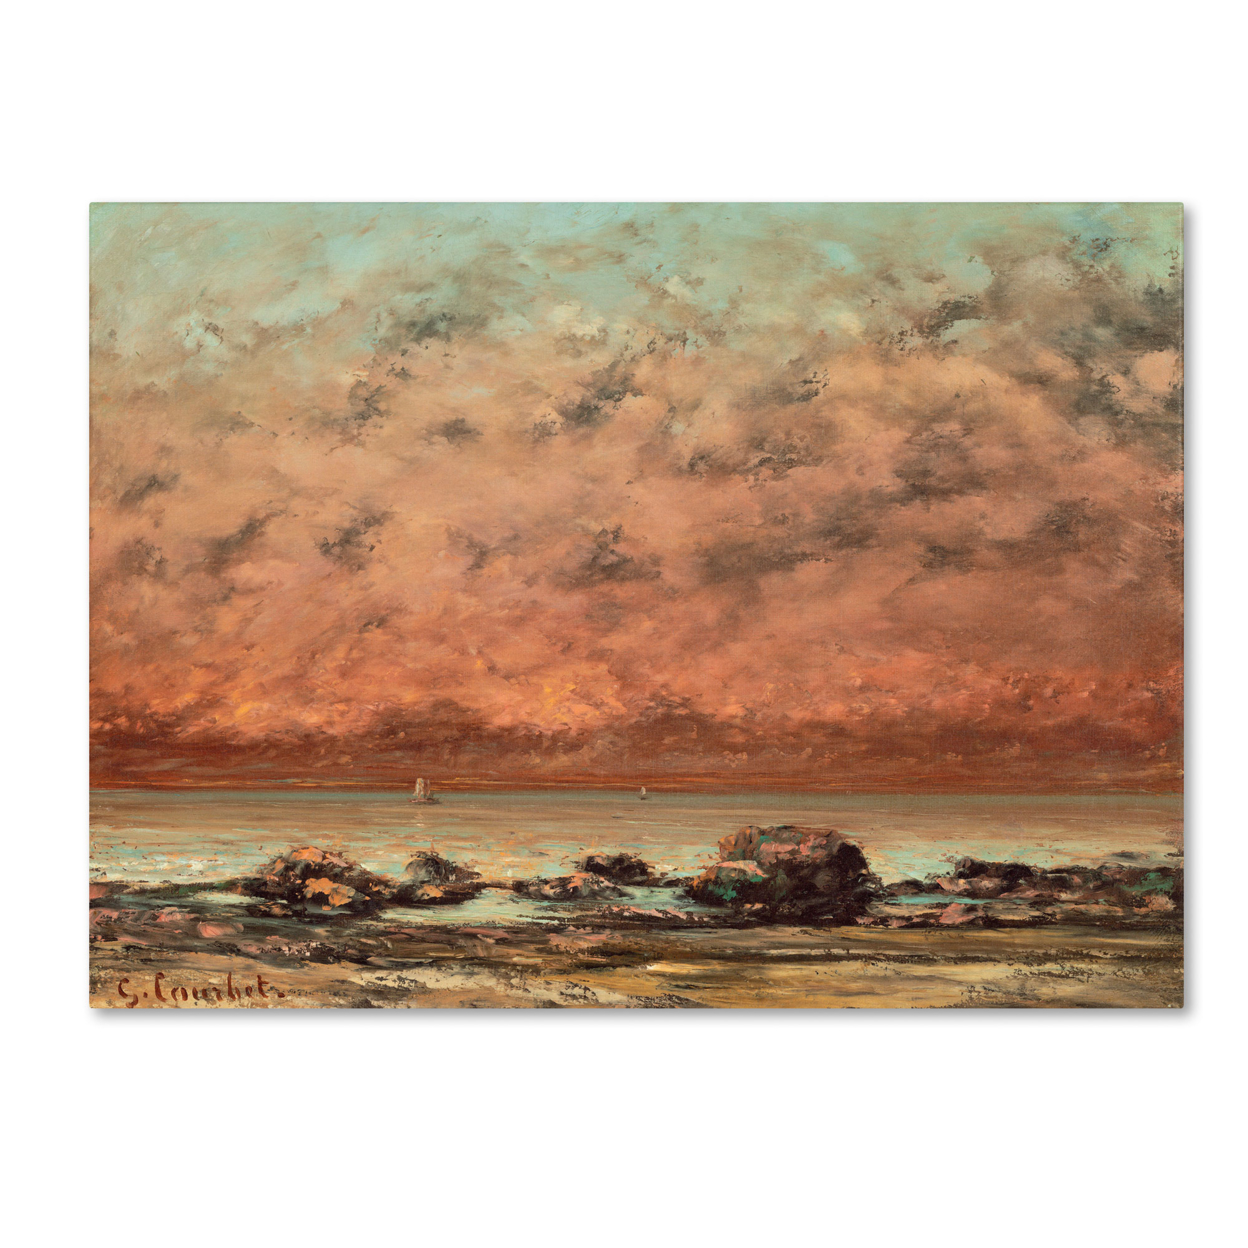 Gustave Courbet 'The Black Rocks At Trouville' Canvas Art 18 X 24